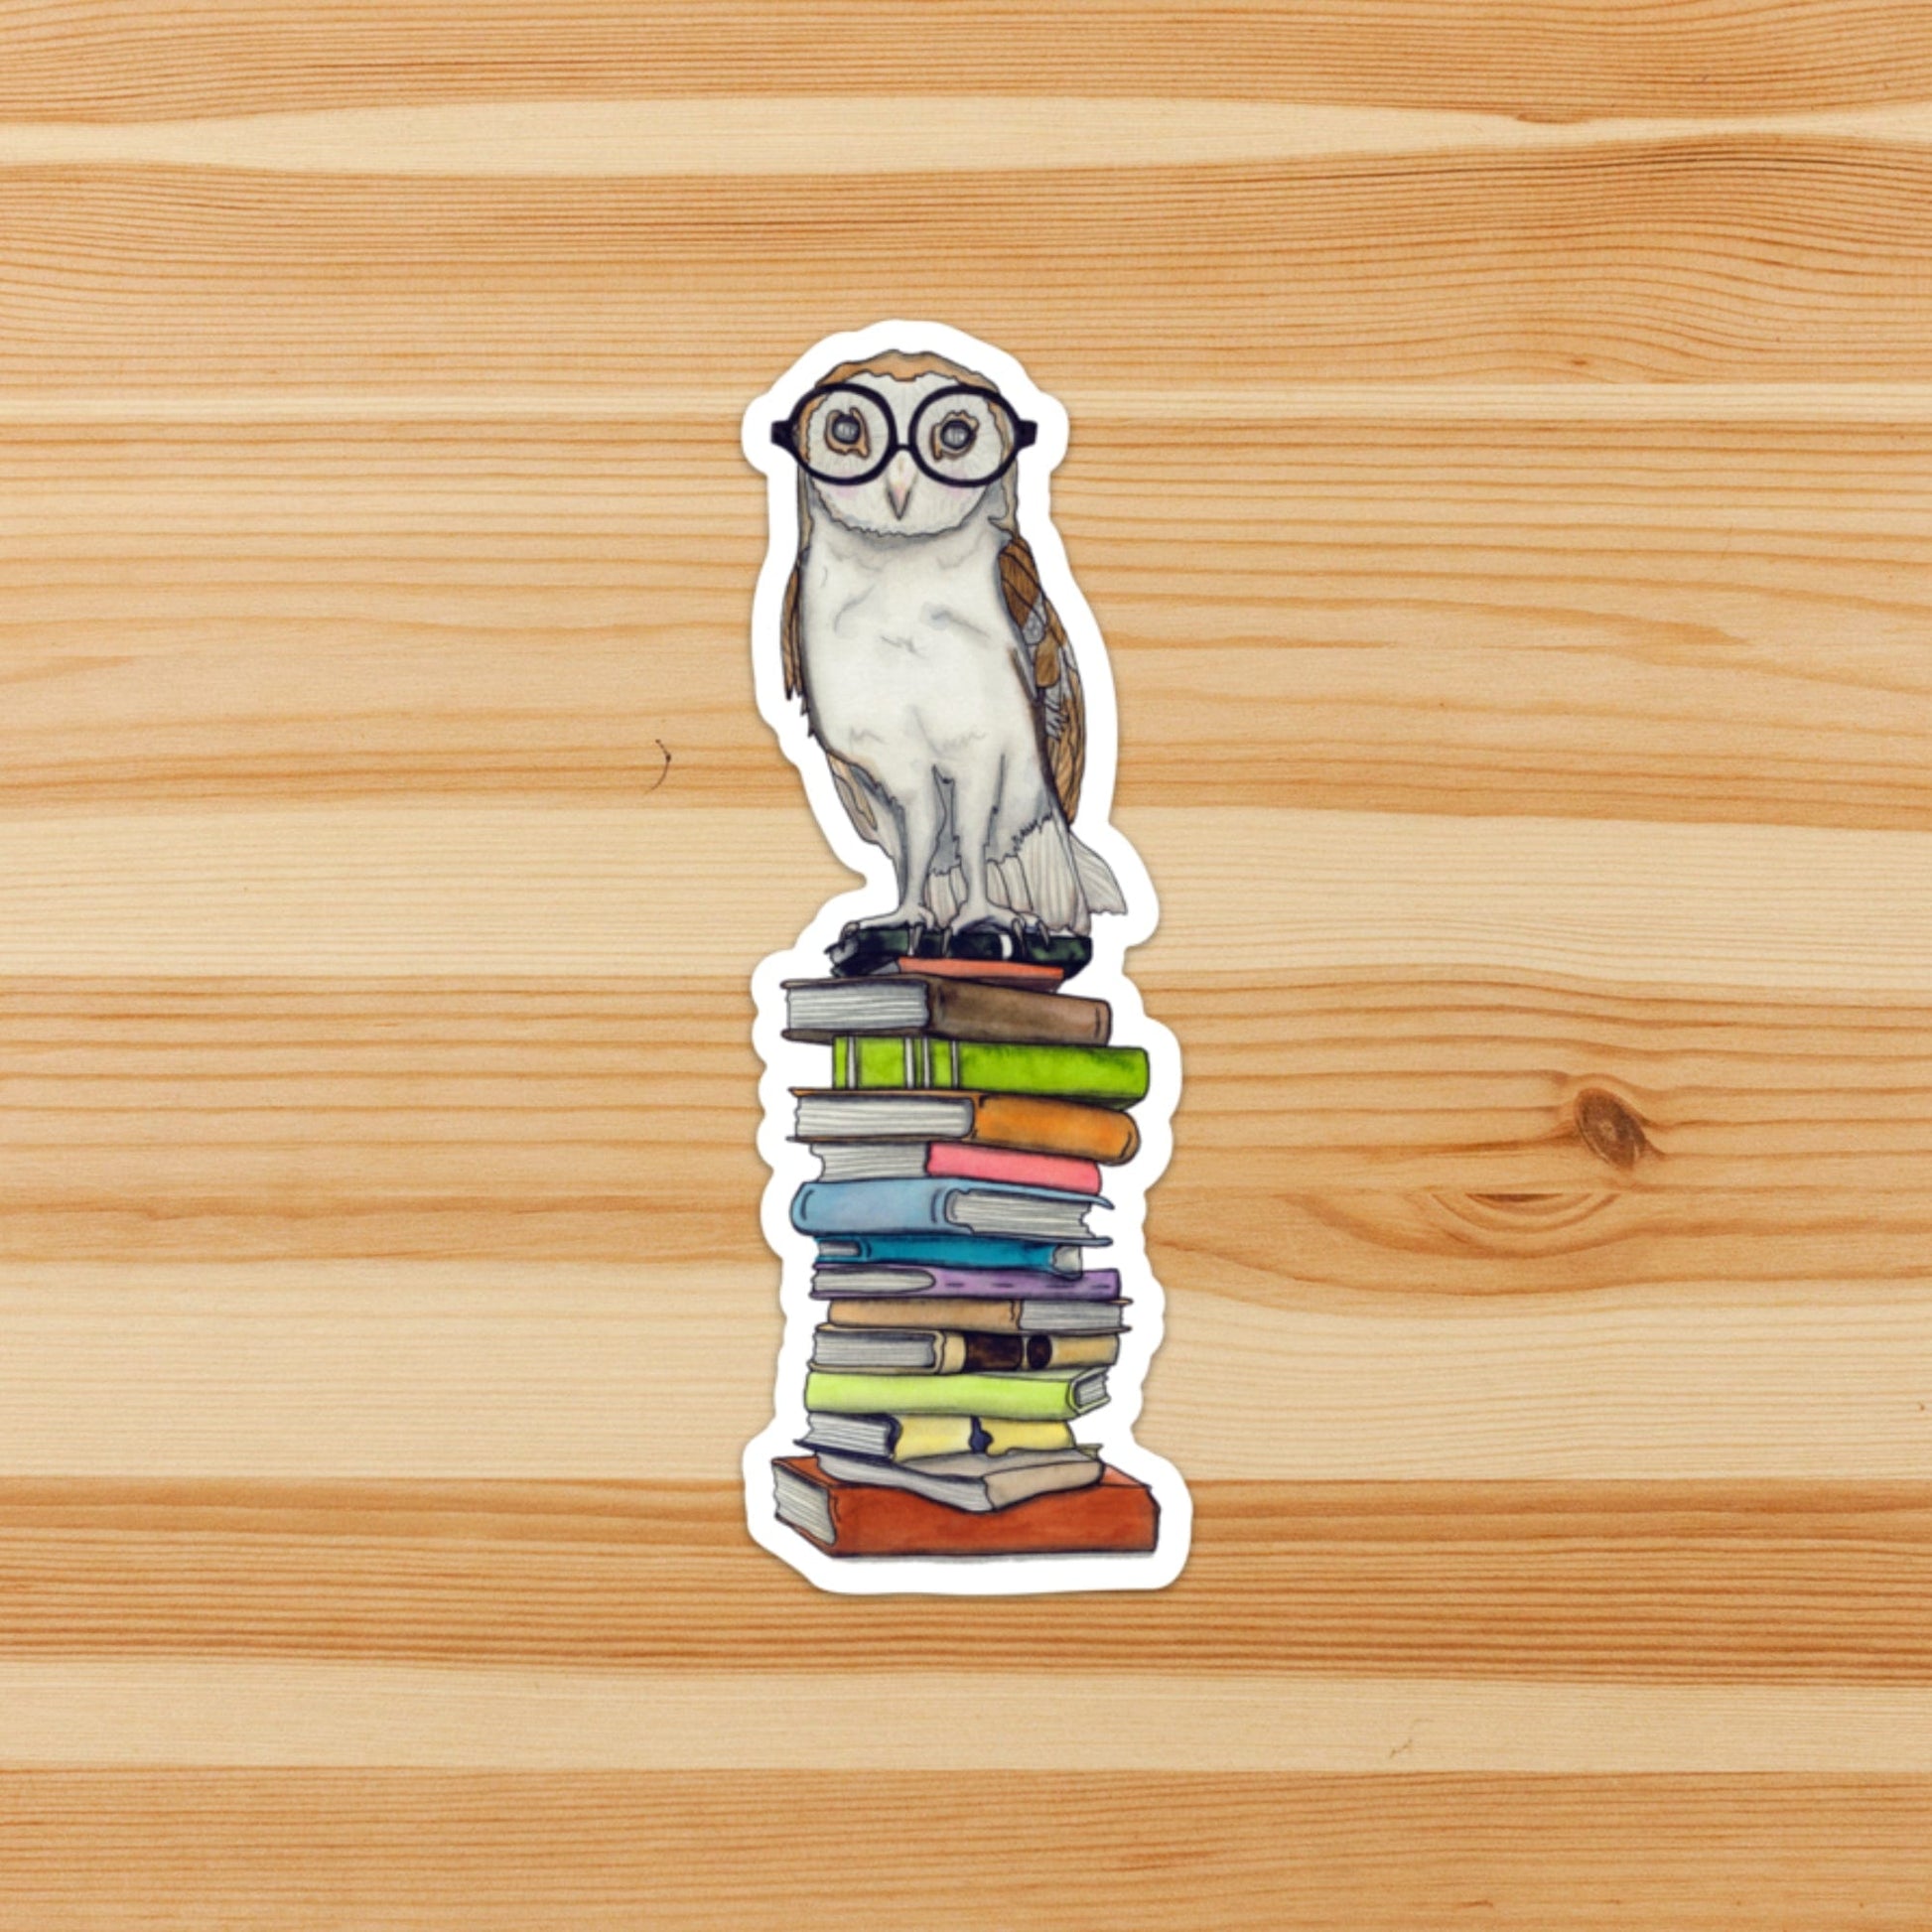 PinkPolish Design Giant Stickers "Book-Learned Owl'  Giant Vinyl Die Cut Sticker